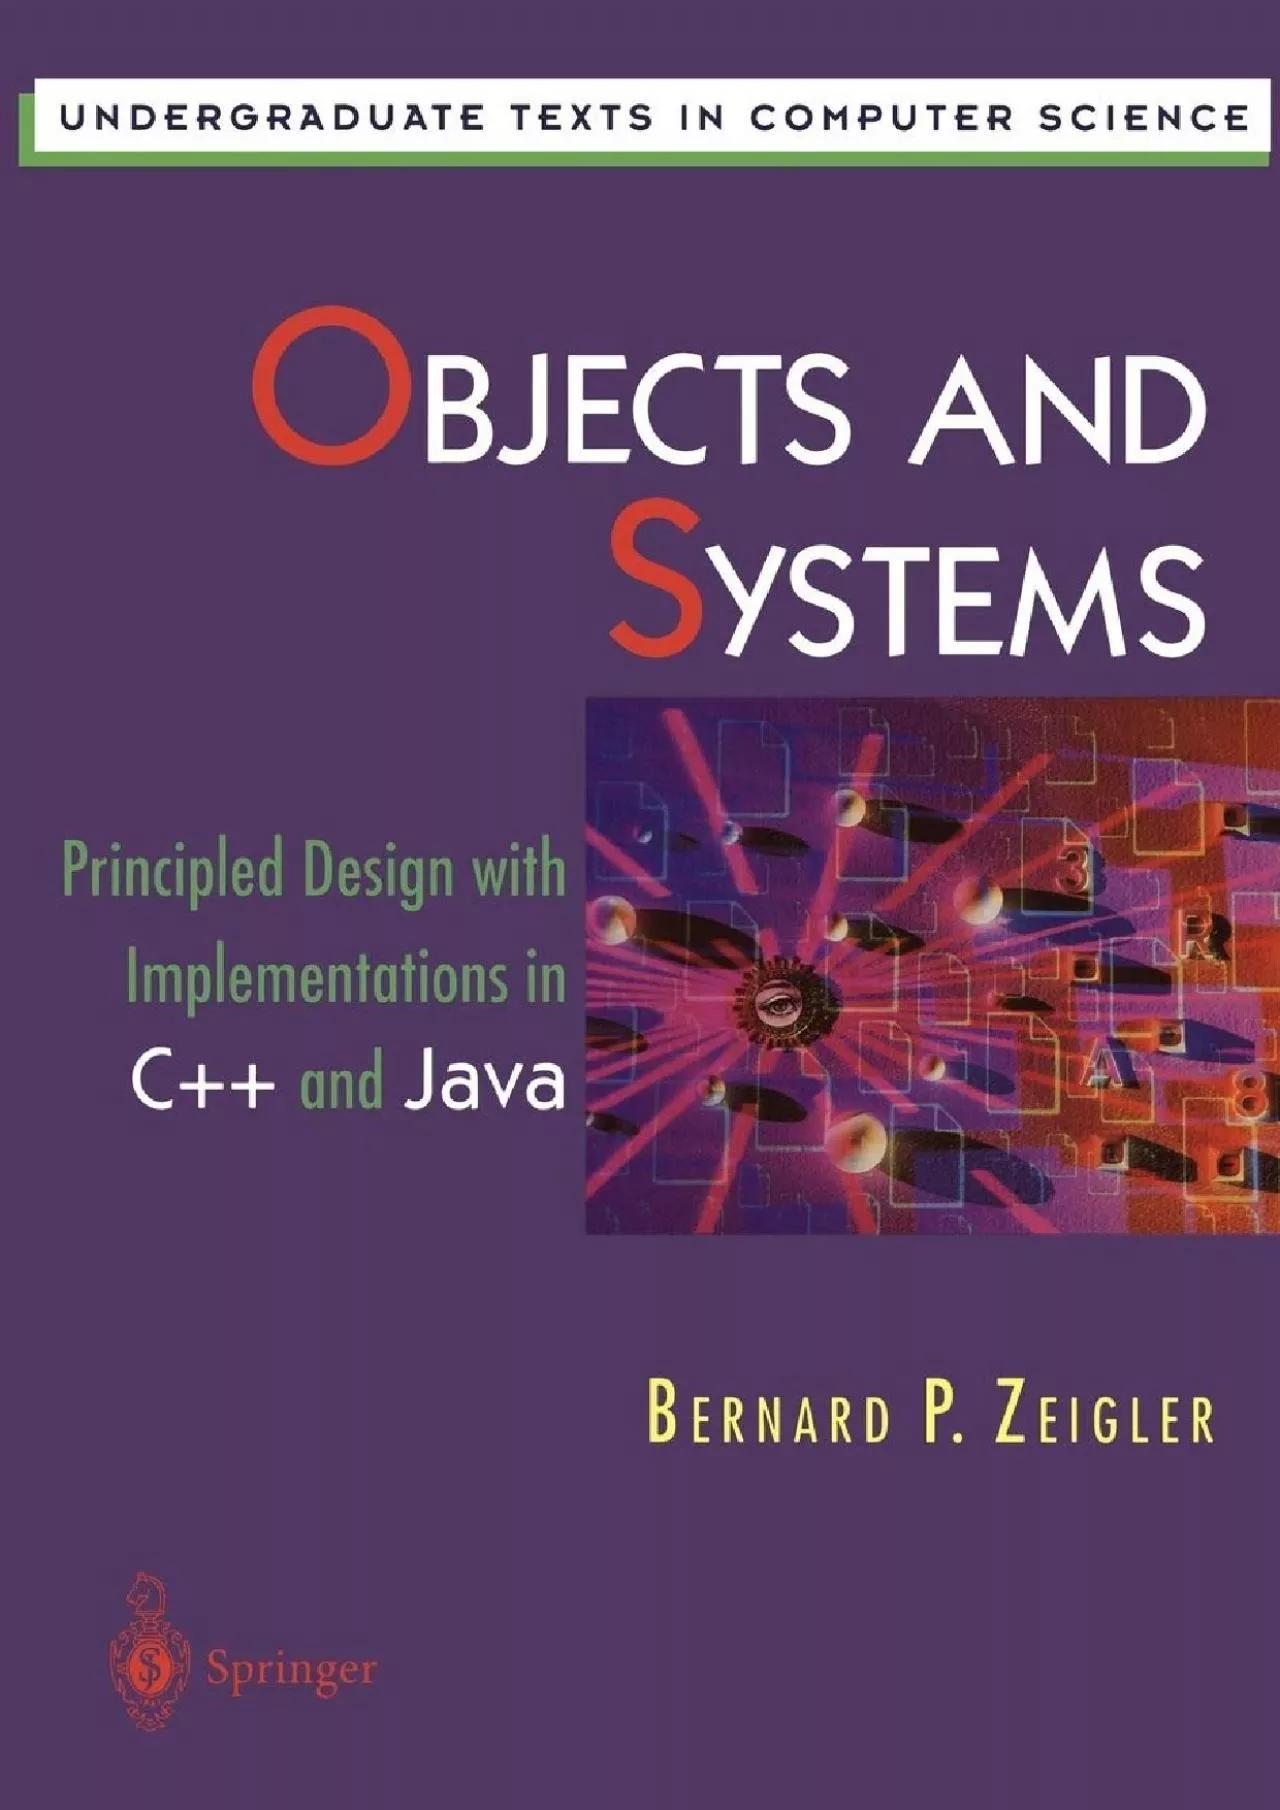 [READING BOOK]-Objects and Systems: Principled Design with Implementations in C++ and